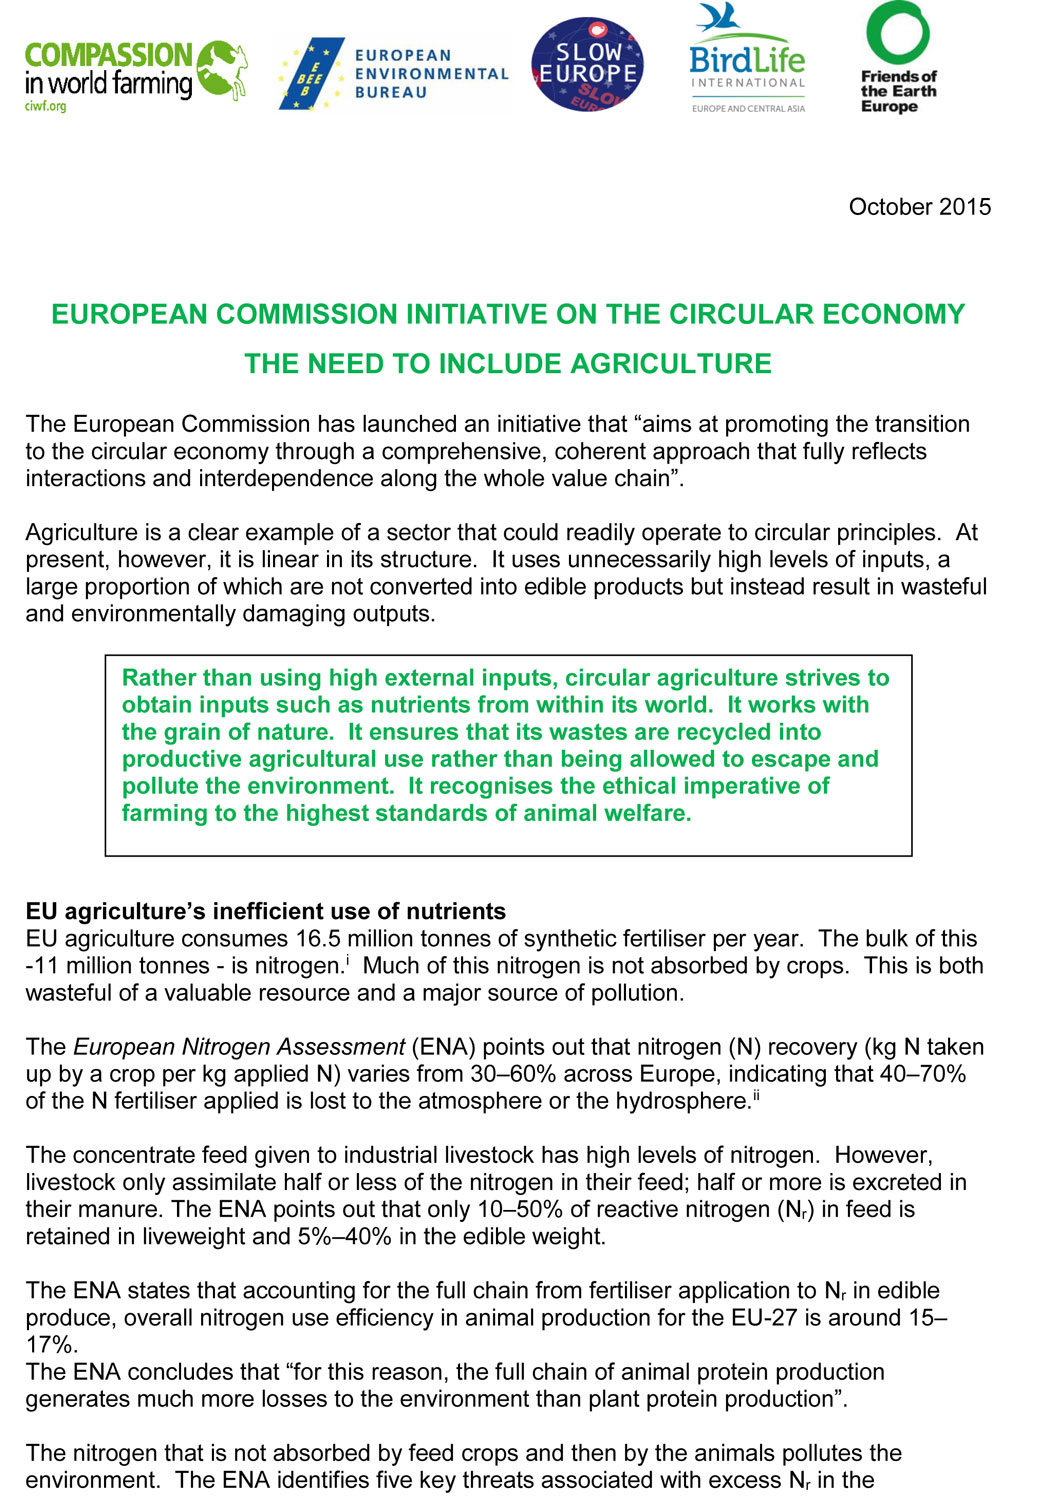 european_commission_initiative_on_the_circular_economy_the_need_to_include_agriculture